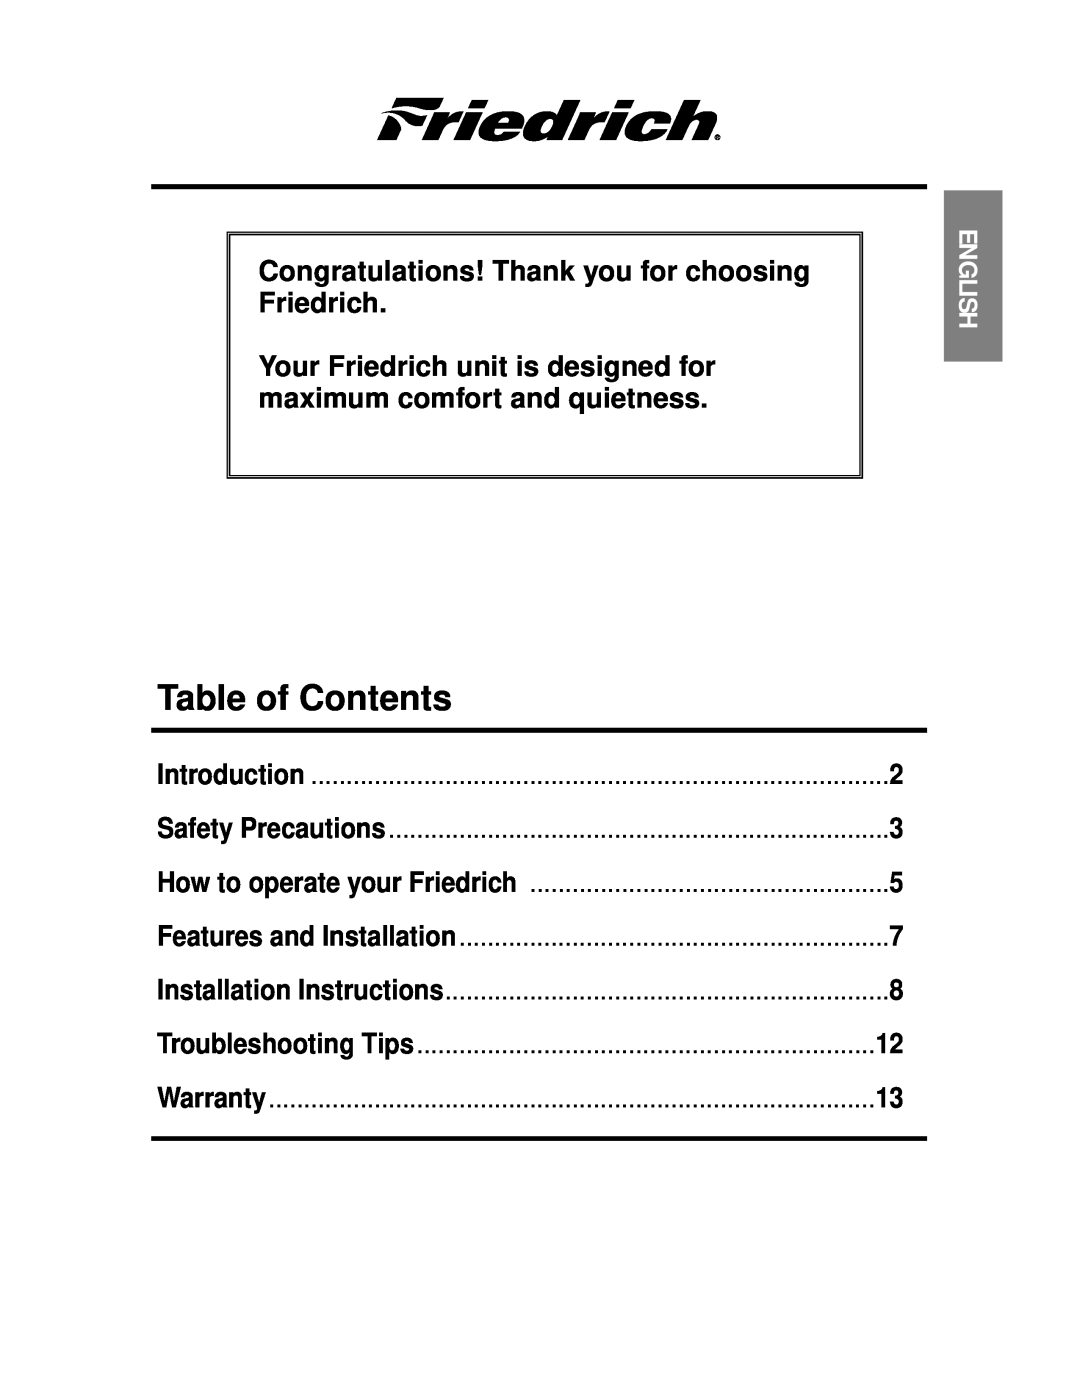 Friedrich CP06 manual Table of Contents, Congratulations! Thank you for choosing Friedrich, English, Introduction, Warranty 